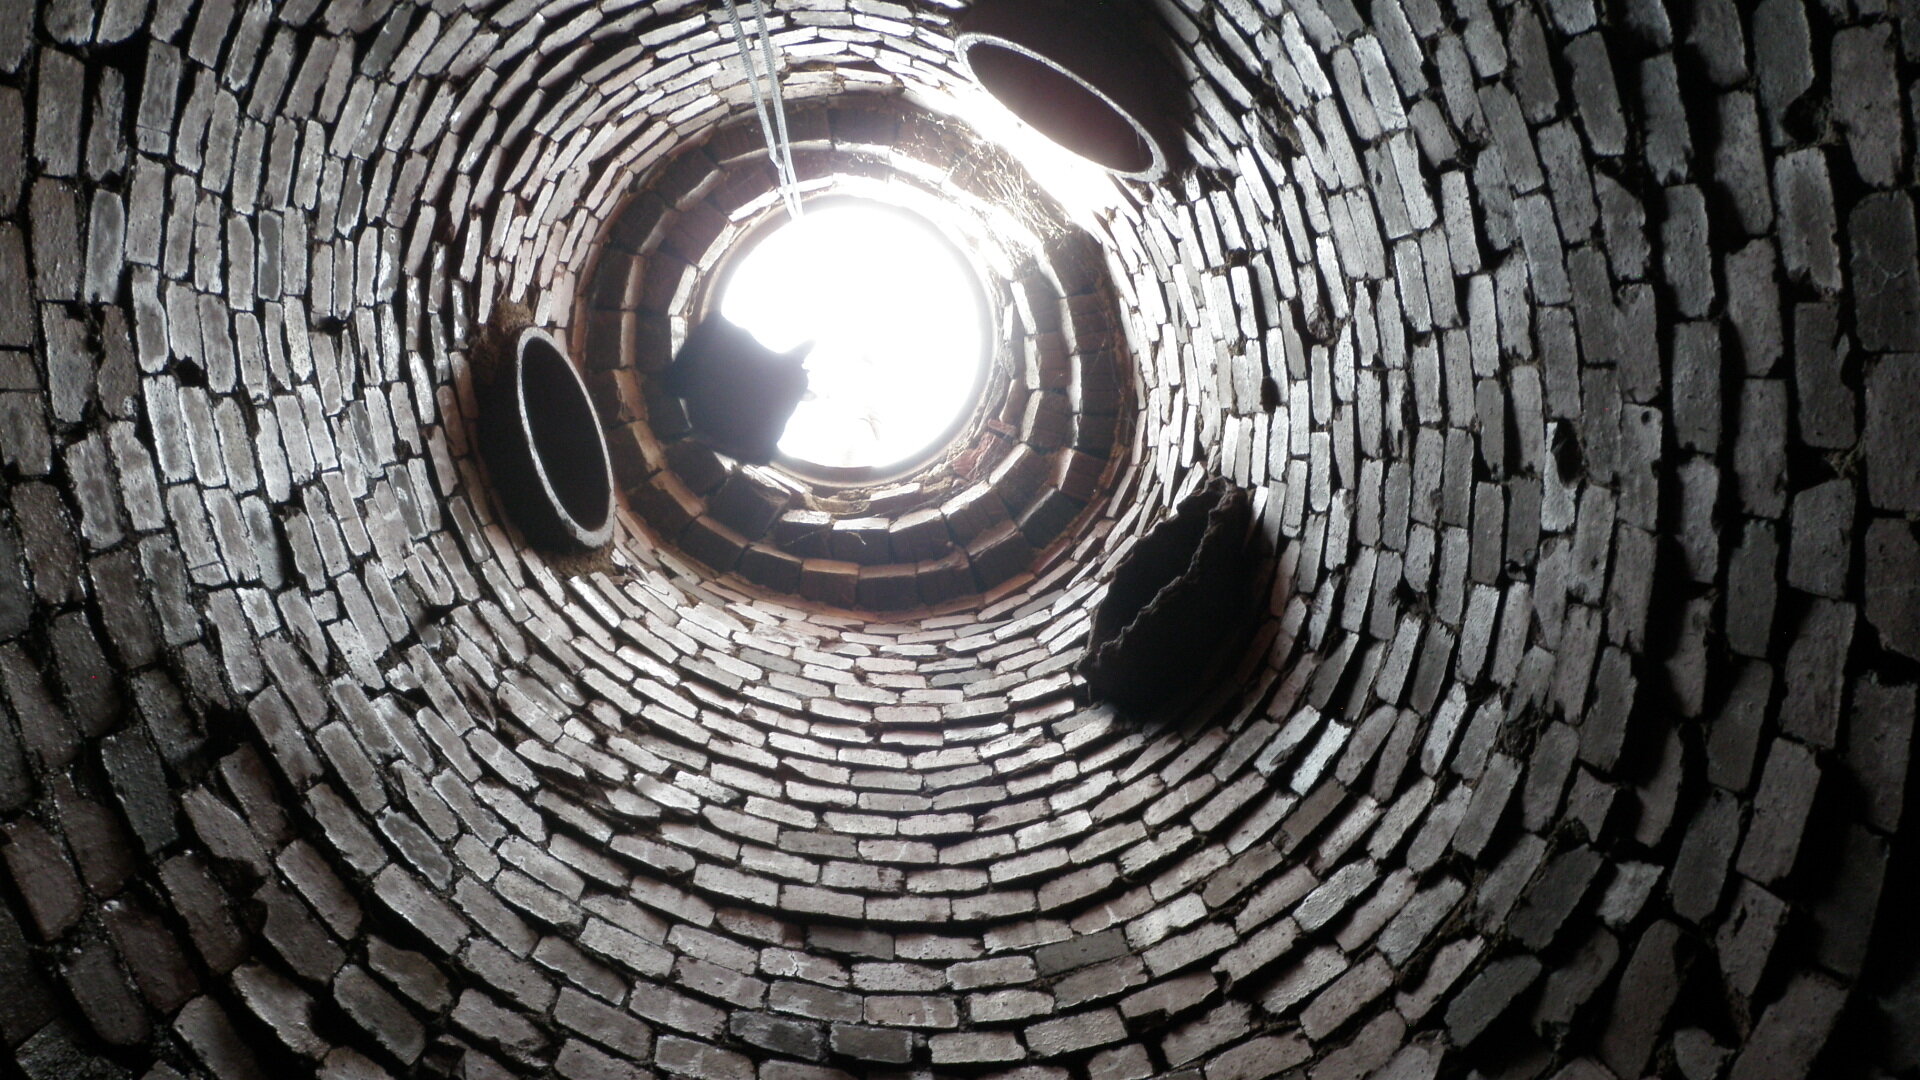  Another view looking up from the bottom of a manhole, with multiple incoming lateral pipes. 